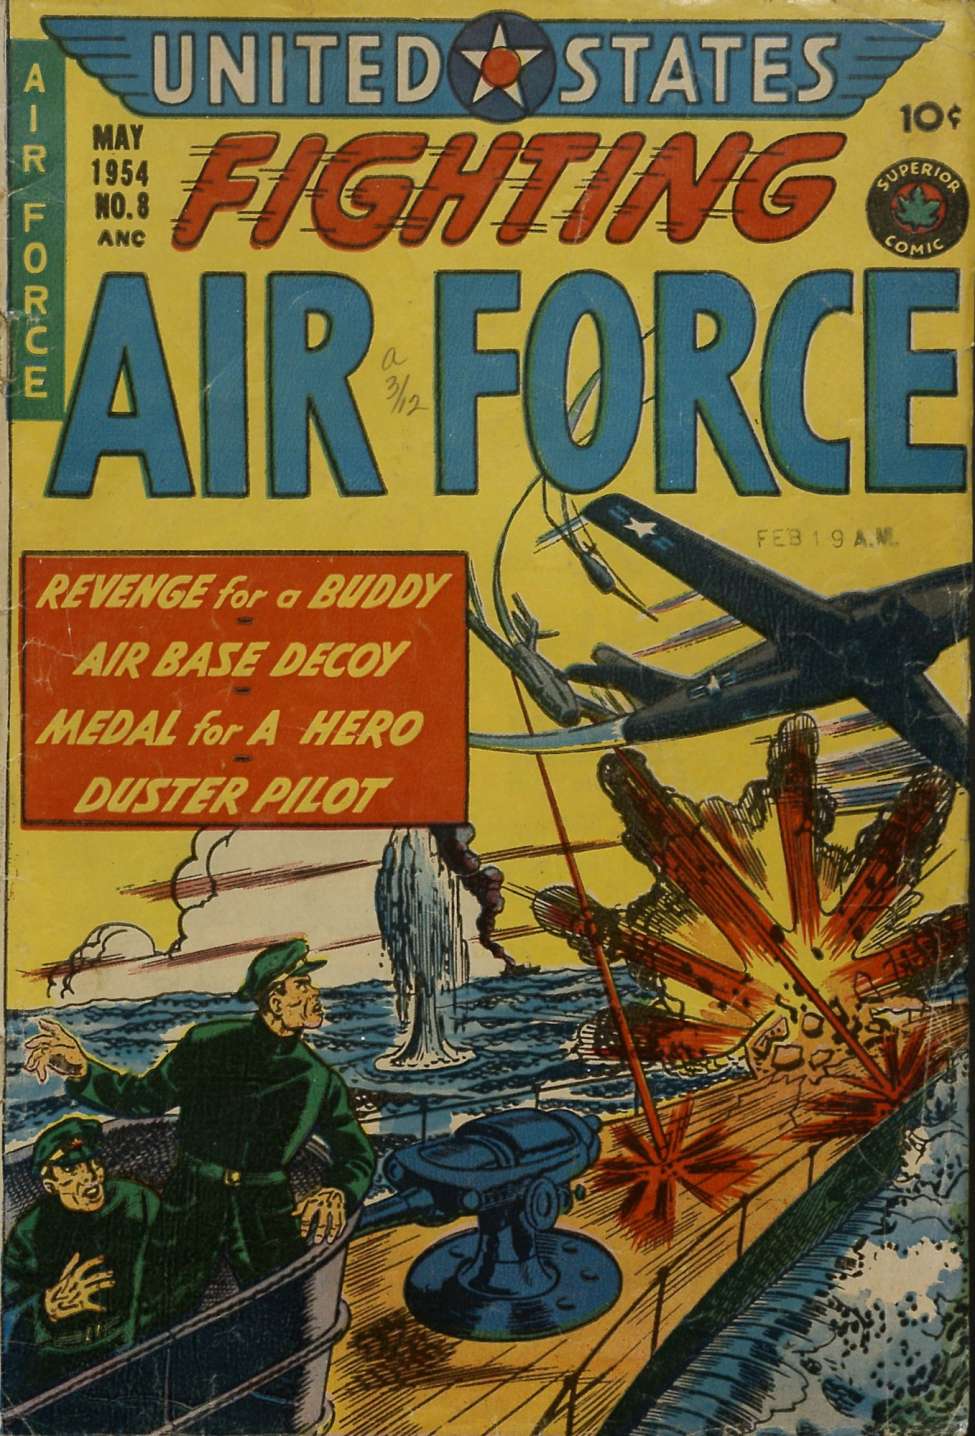 Book Cover For U.S. Fighting Air Force 8